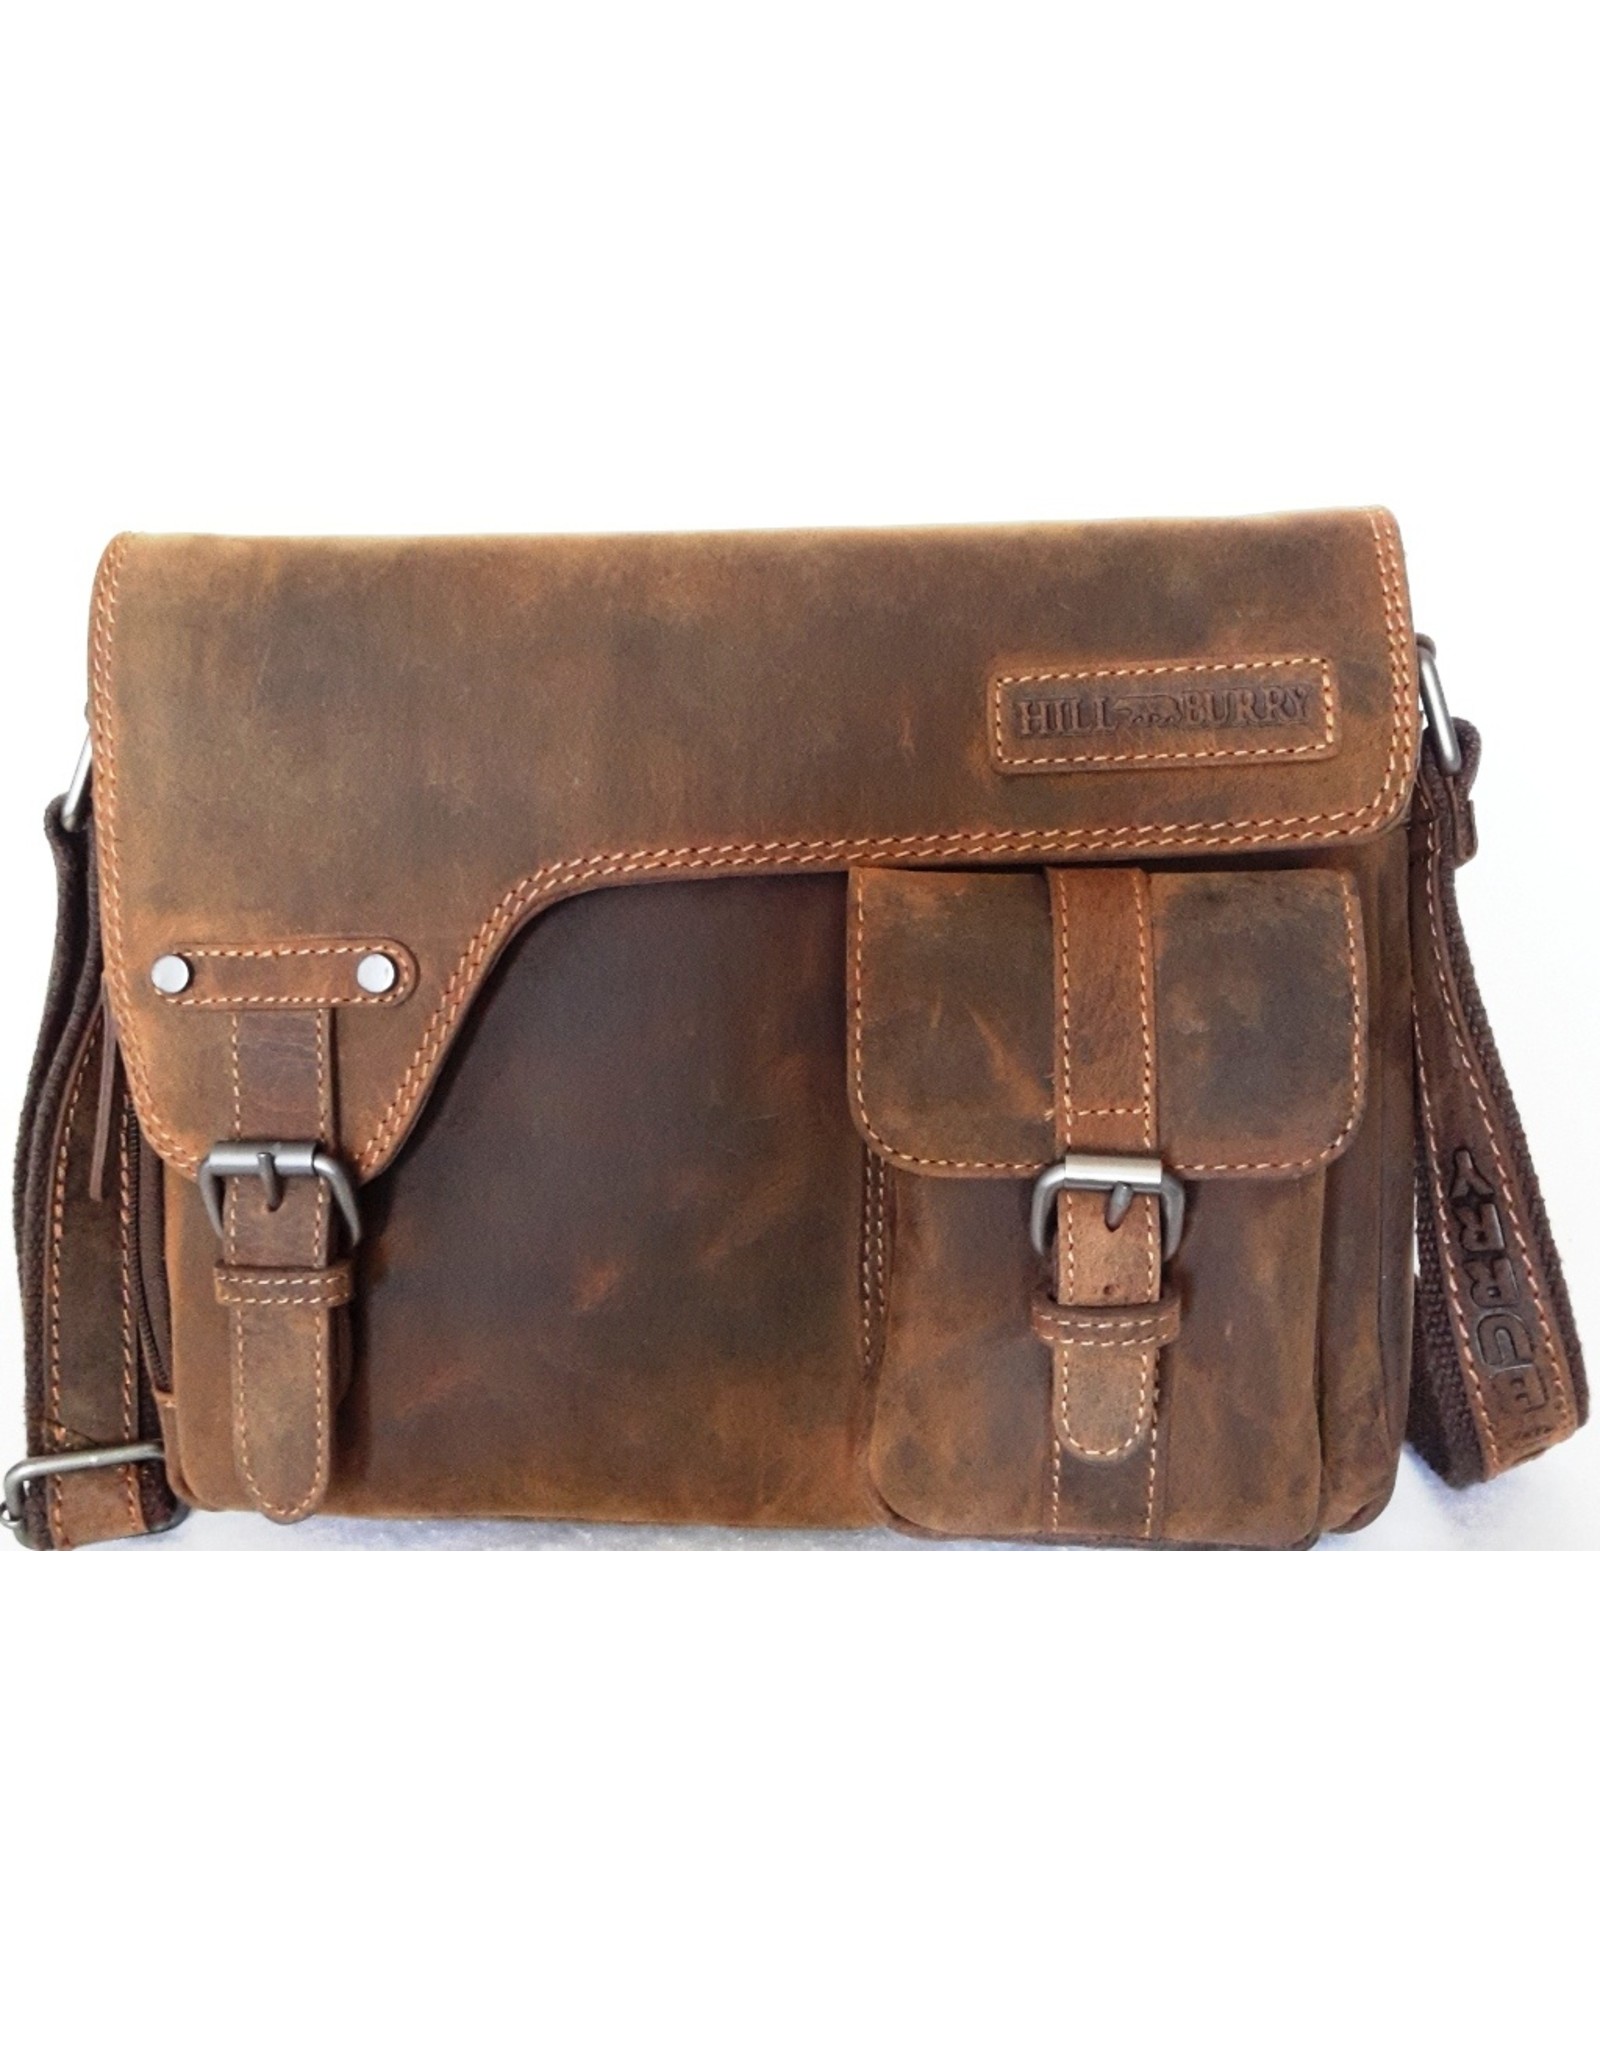 HillBurry Leather laptop bags - HillBurry Leather bag with holster cover (medium)